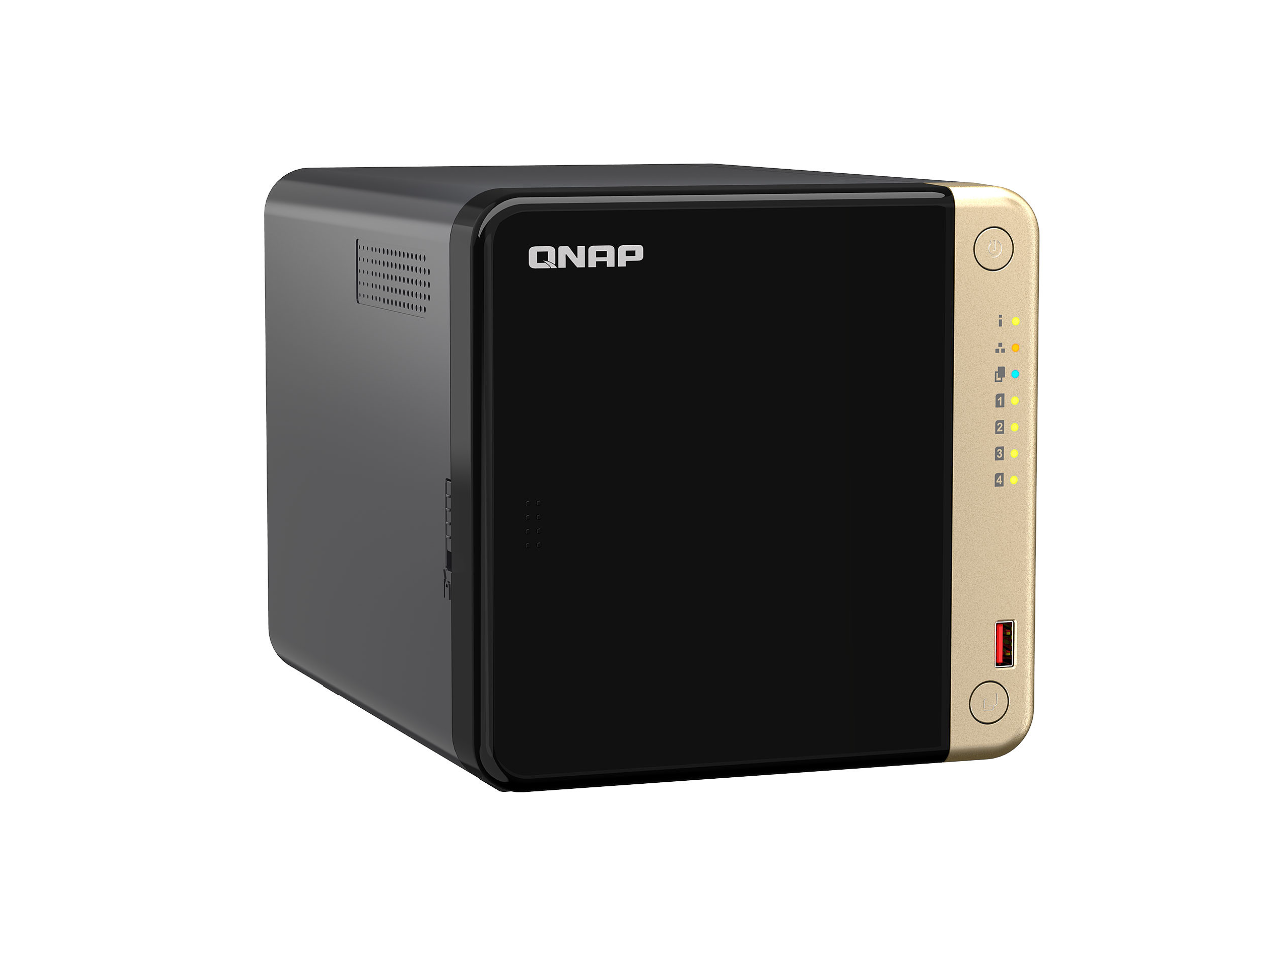 QNAP TS-464 4-Bay NAS with 8GB RAM, 500GB (2 x 250GB) NVME Cache, and 12TB (4 x 3TB) of Western Digital Red Plus Drives Fully Assembled and Tested